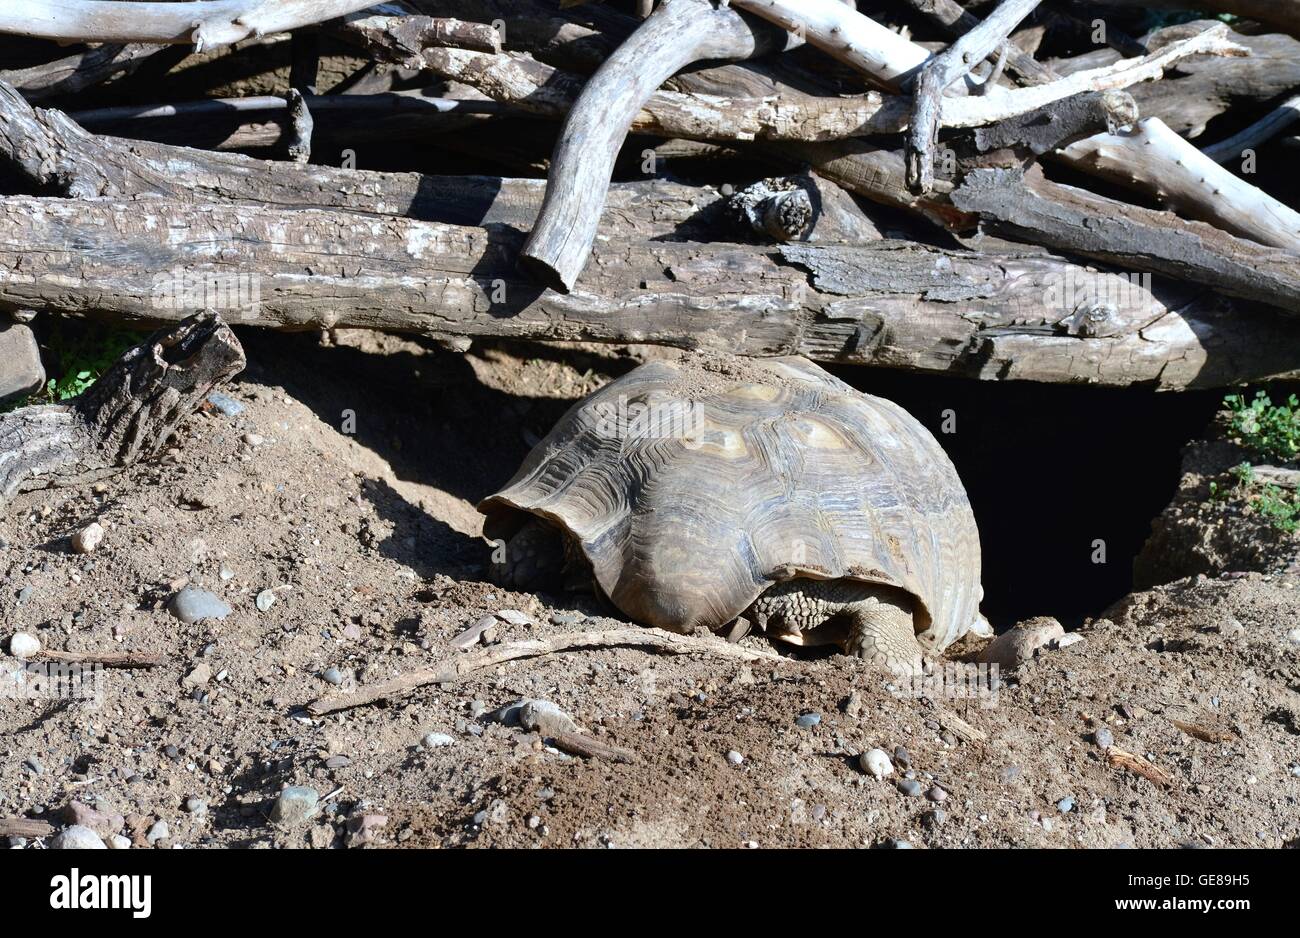 A Galapagos tortoise digging in the dirt to get out the the sun Stock Photo